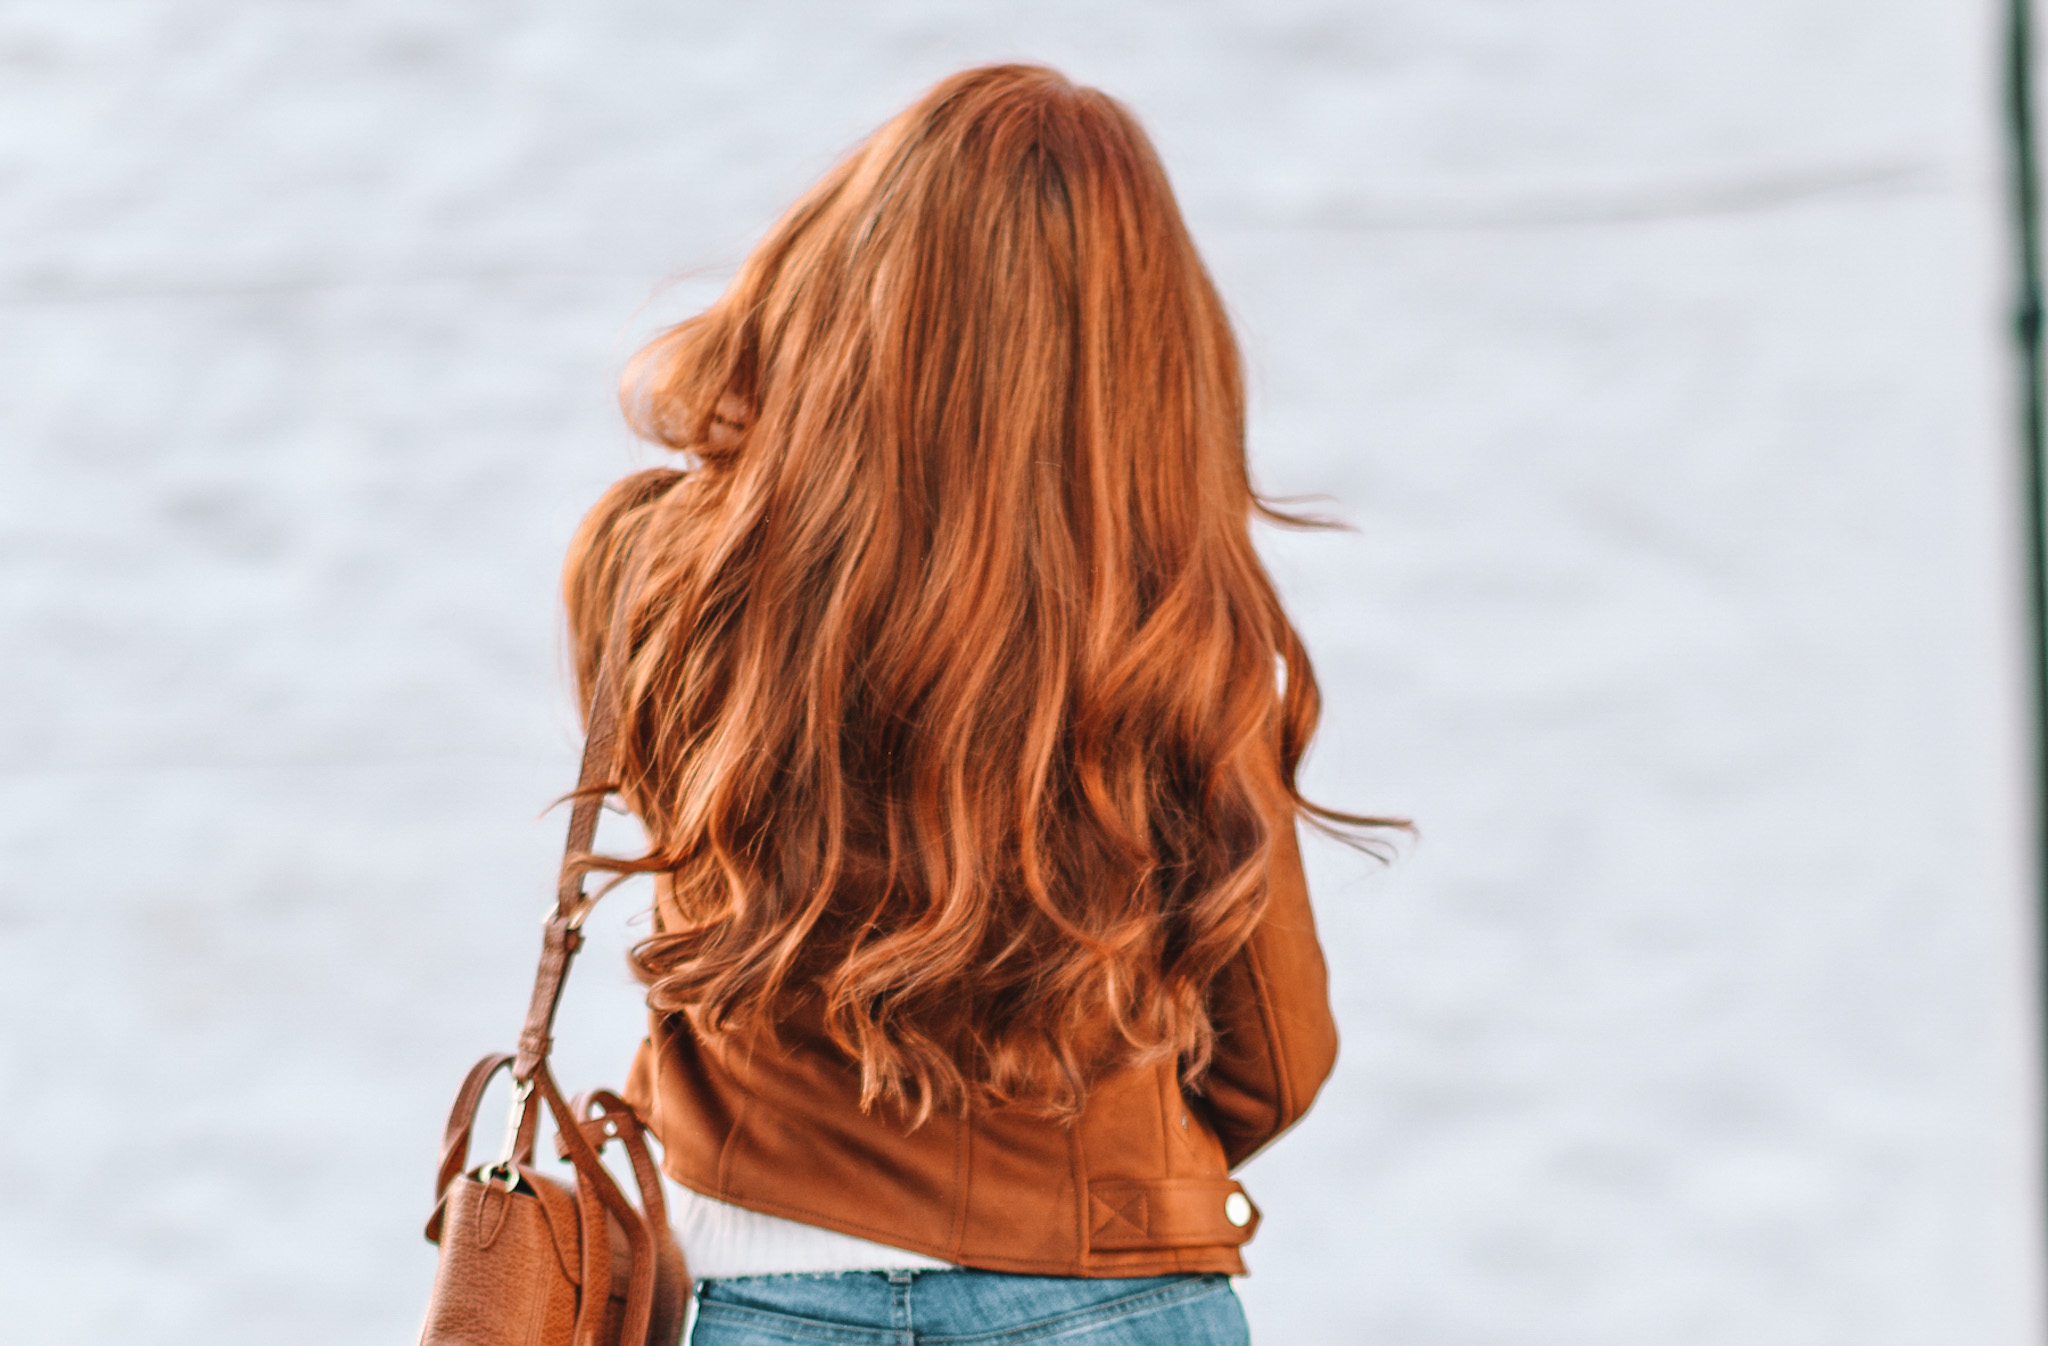 shampoo and conditioner for red hair